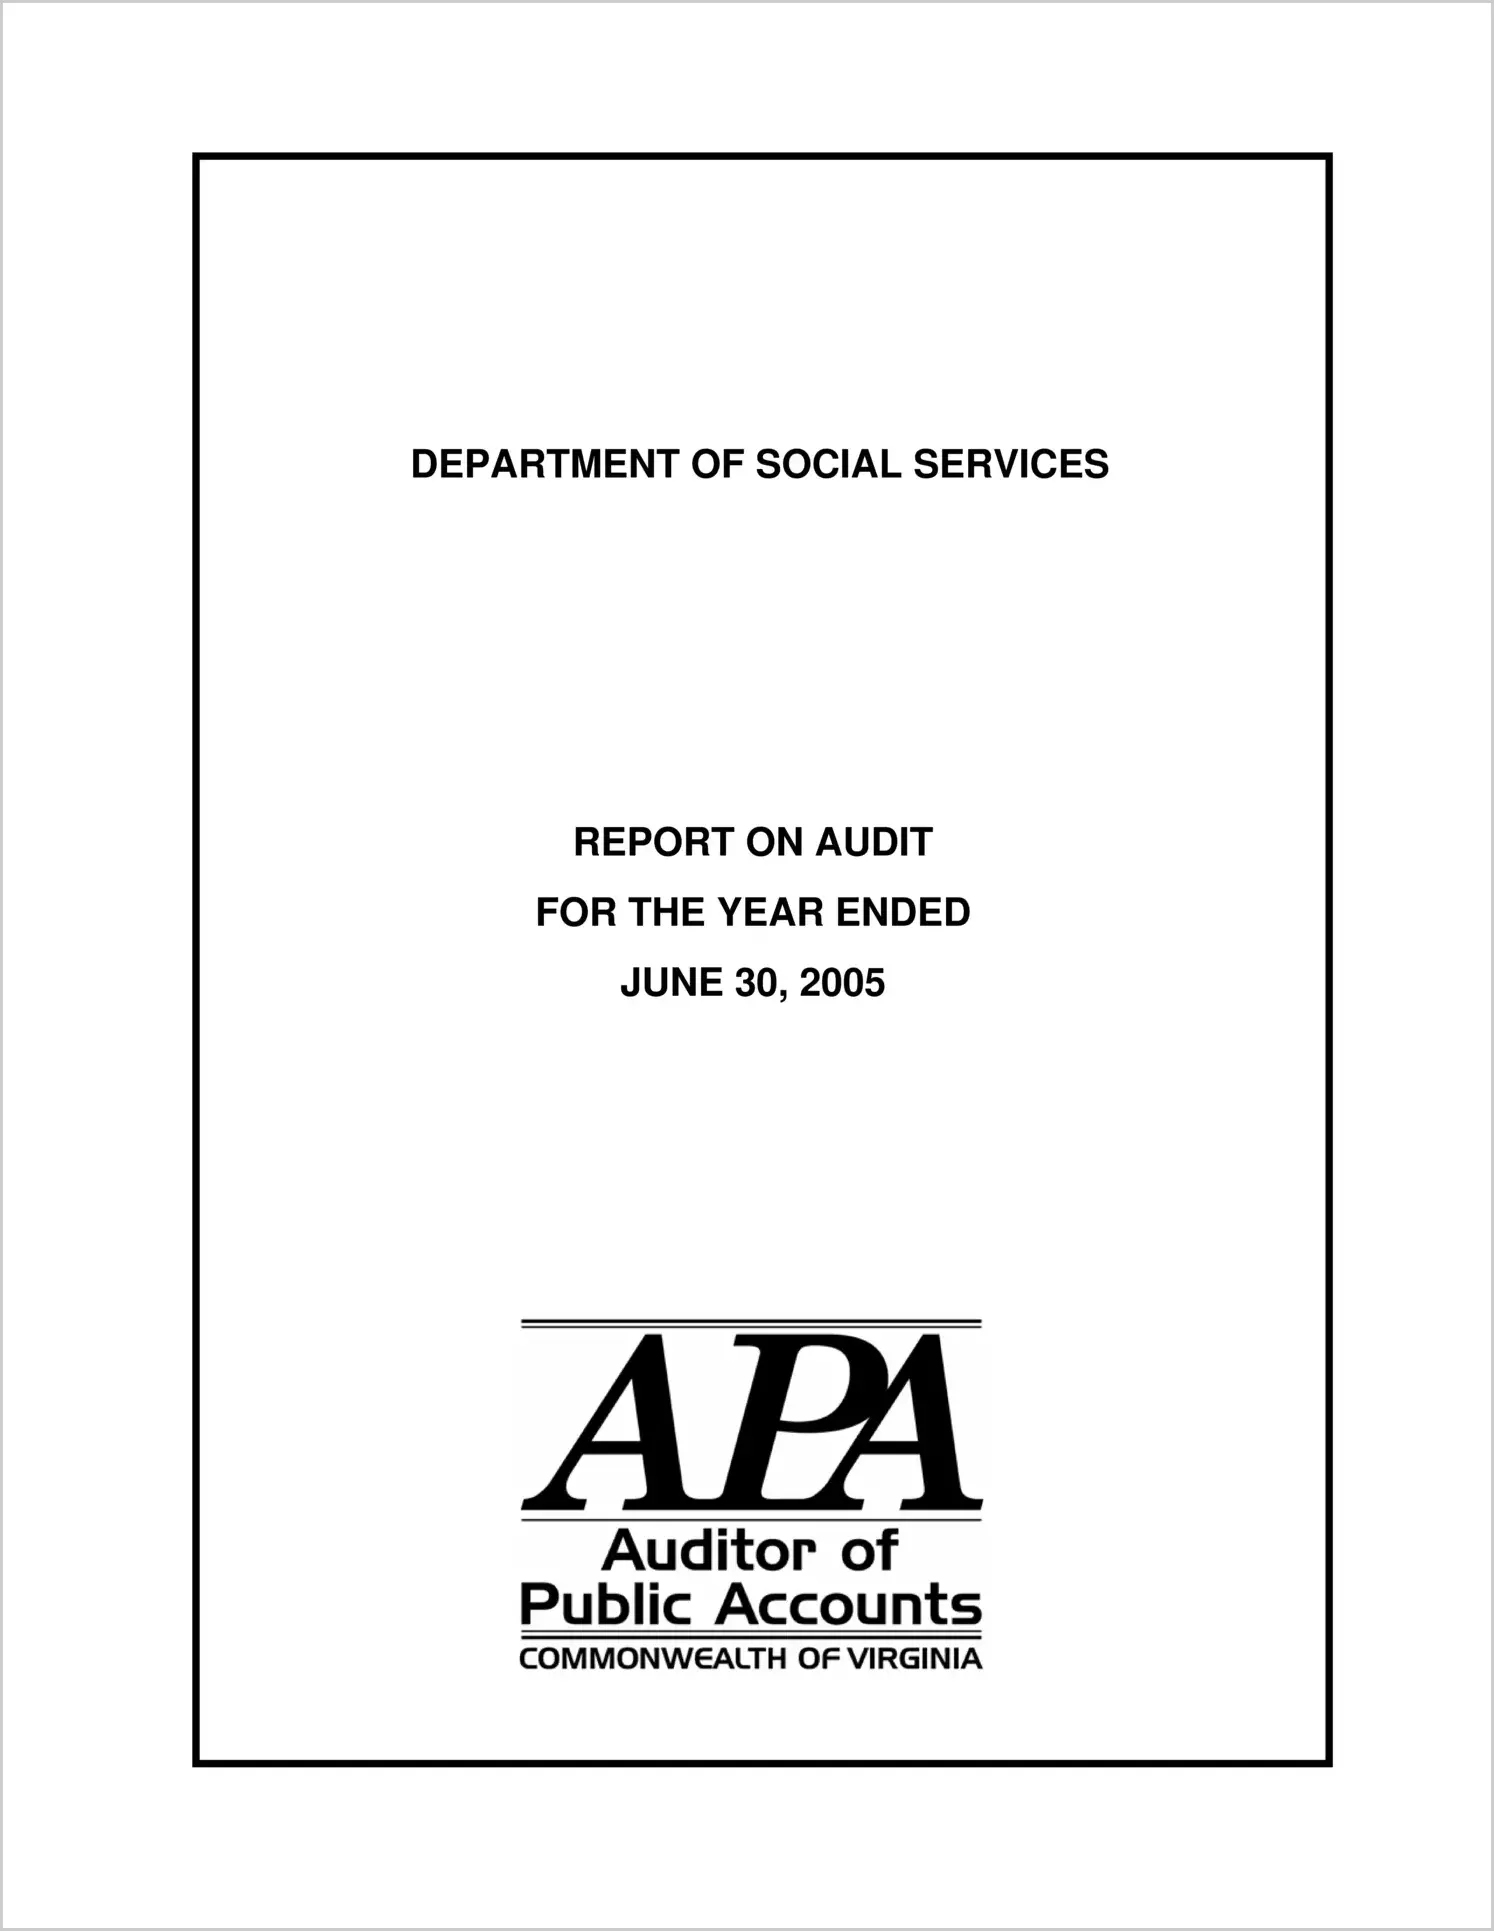 Department of Social Services for the year ended June 30, 2005